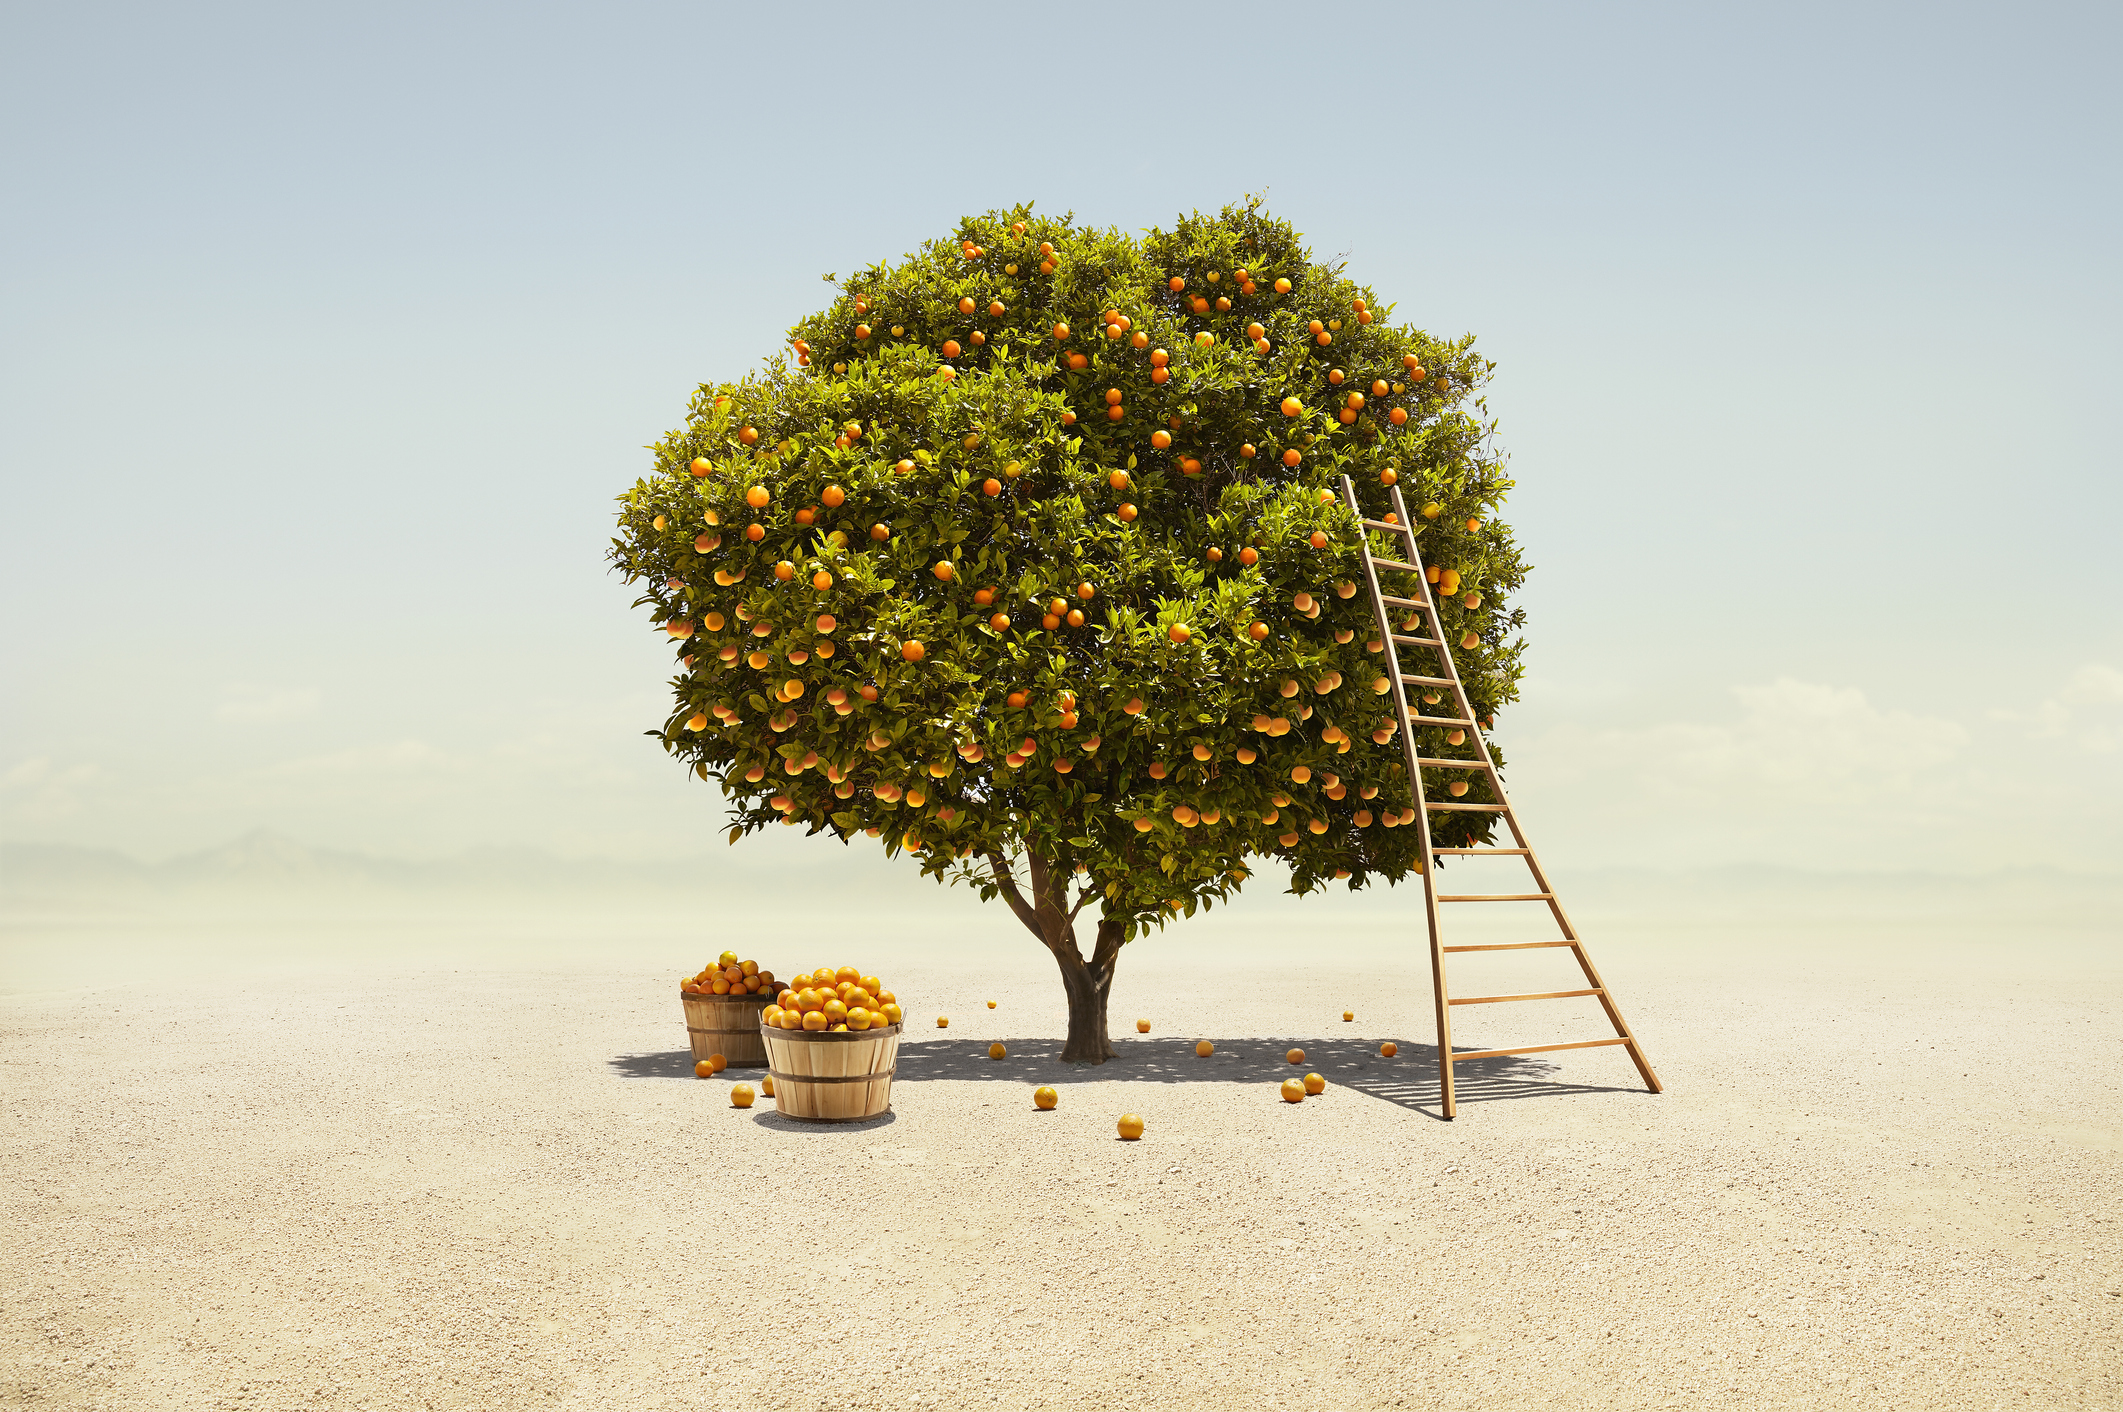 A fully fruited orange tree harvested from a desert landscape in Southern California;  new investors thrive in downturns